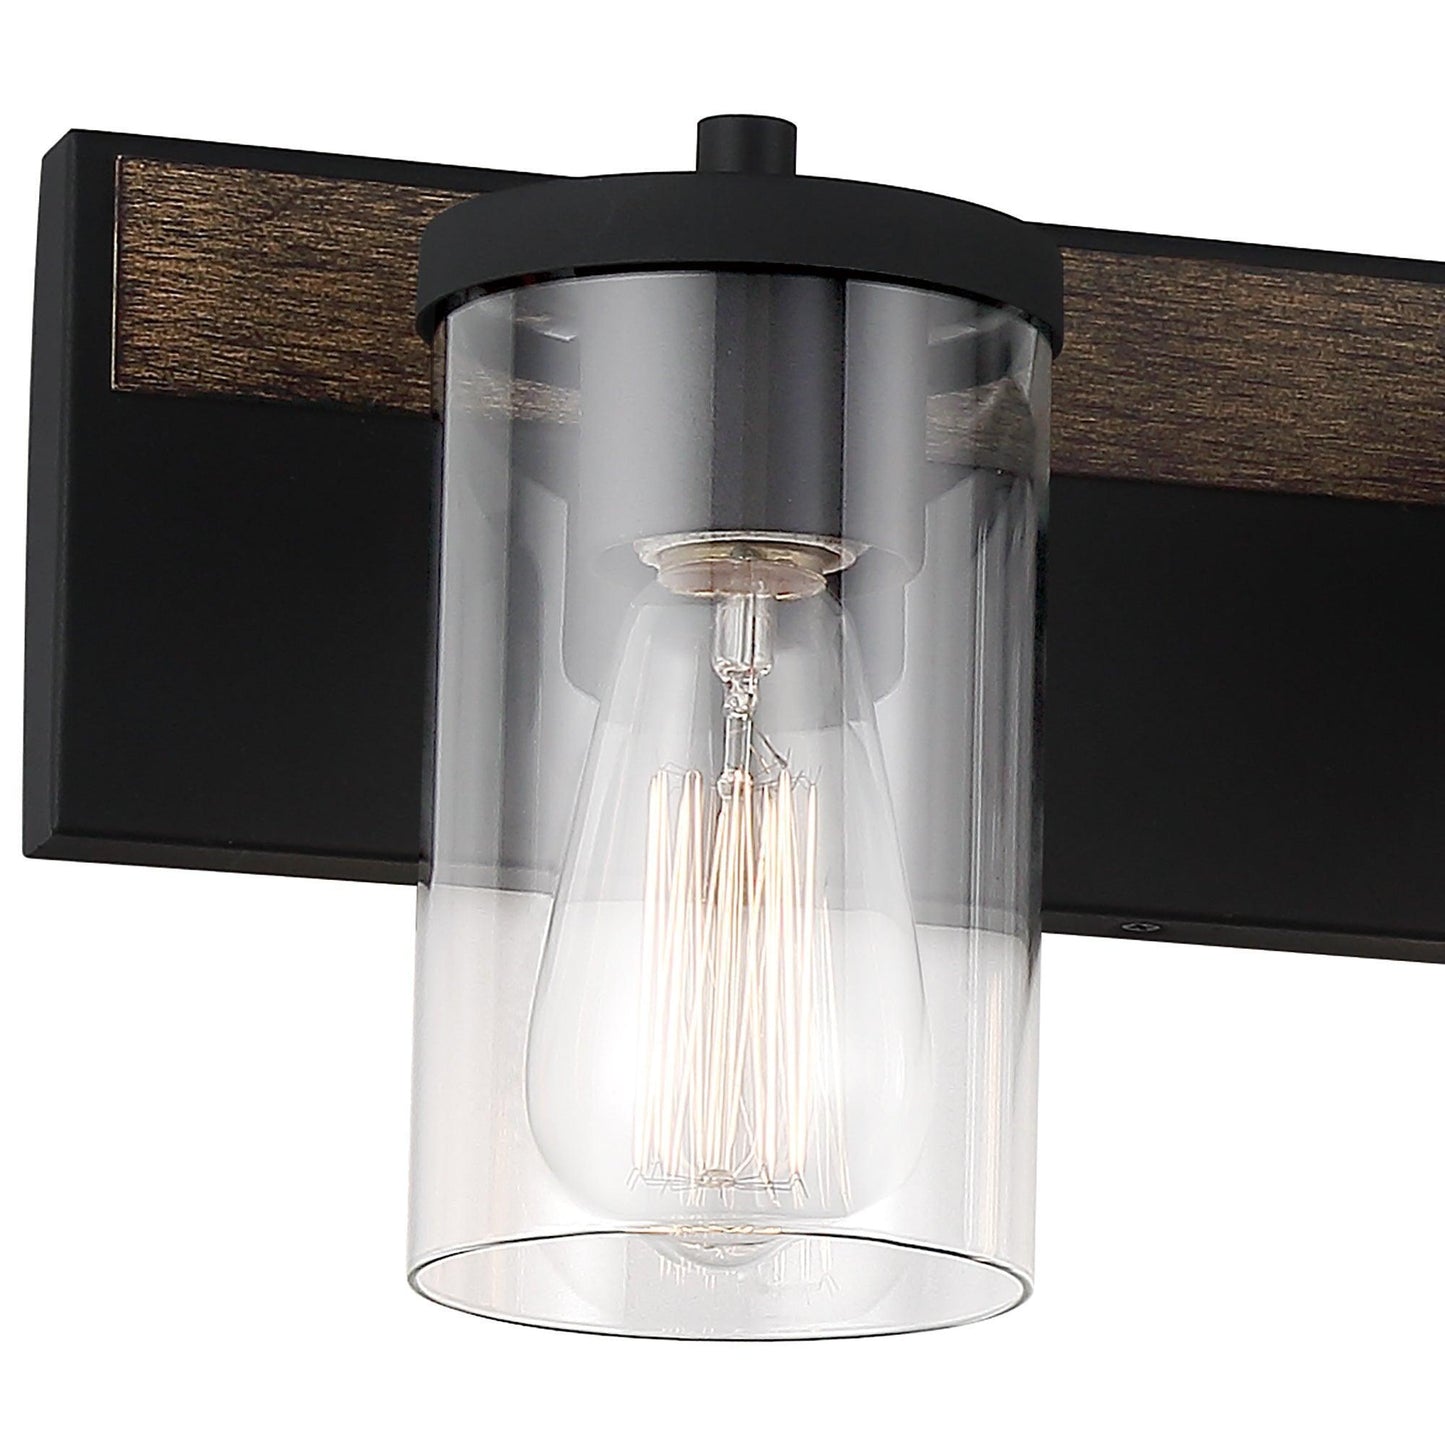 2504 | 4 - Light Dimmable Vanity Light by ACROMA™  UL - ACROMA